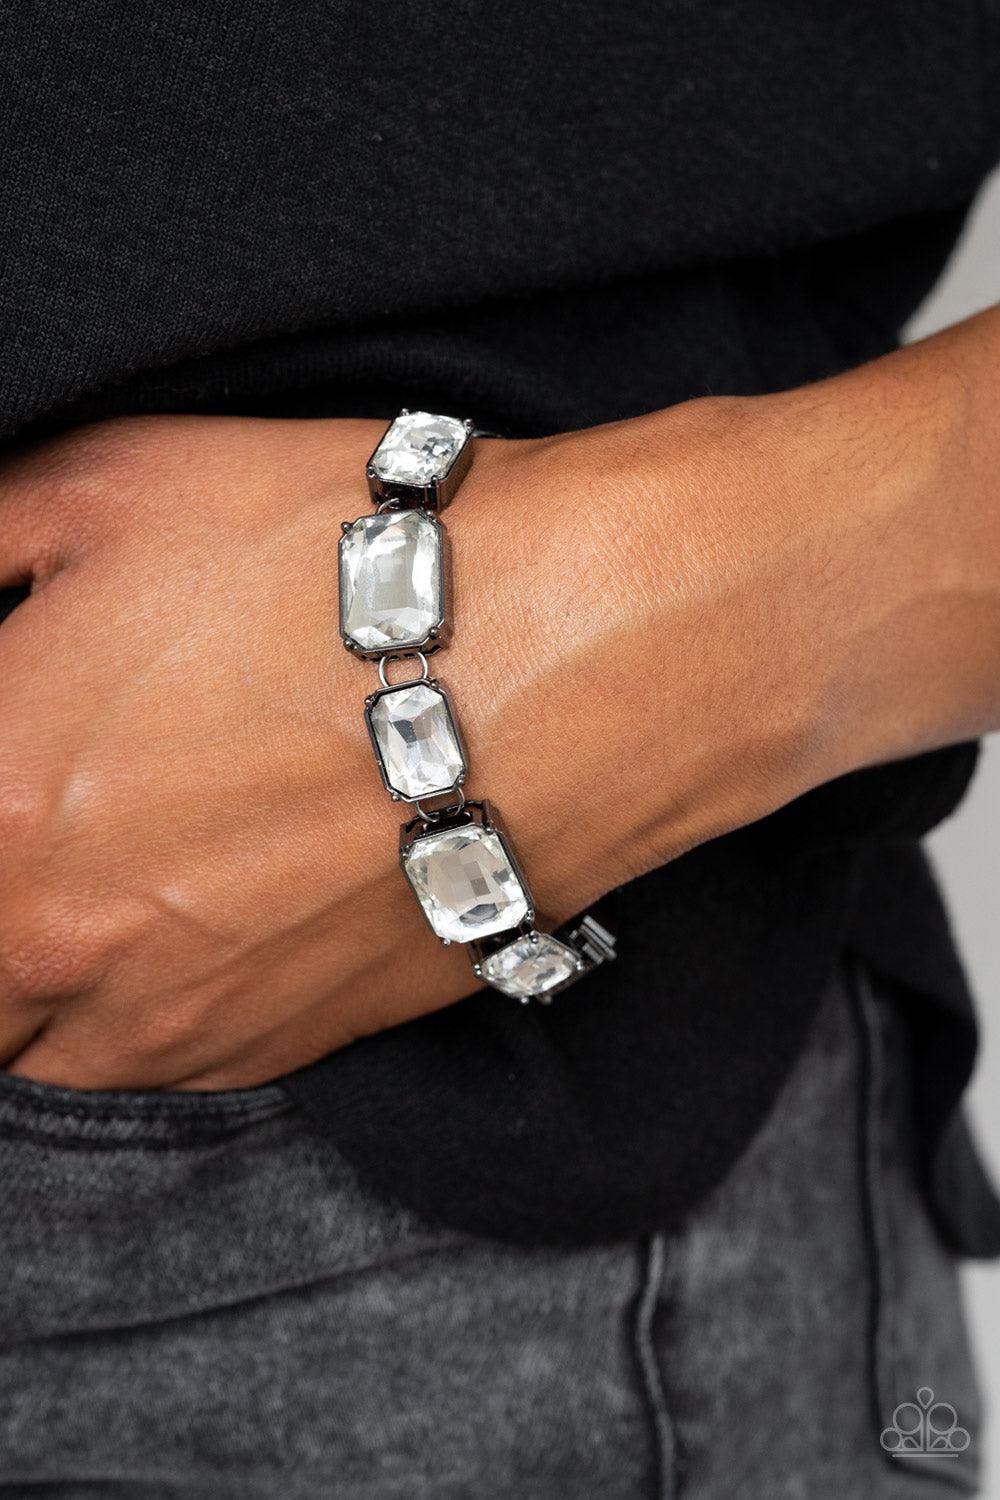 Paparazzi Accessories After Hours - Black Encased in sleek gunmetal fittings, a regal chain of small and large white emerald style gems alternate along the wrist for a timeless finish. Features an adjustable clasp closure. Sold as one individual bracelet.